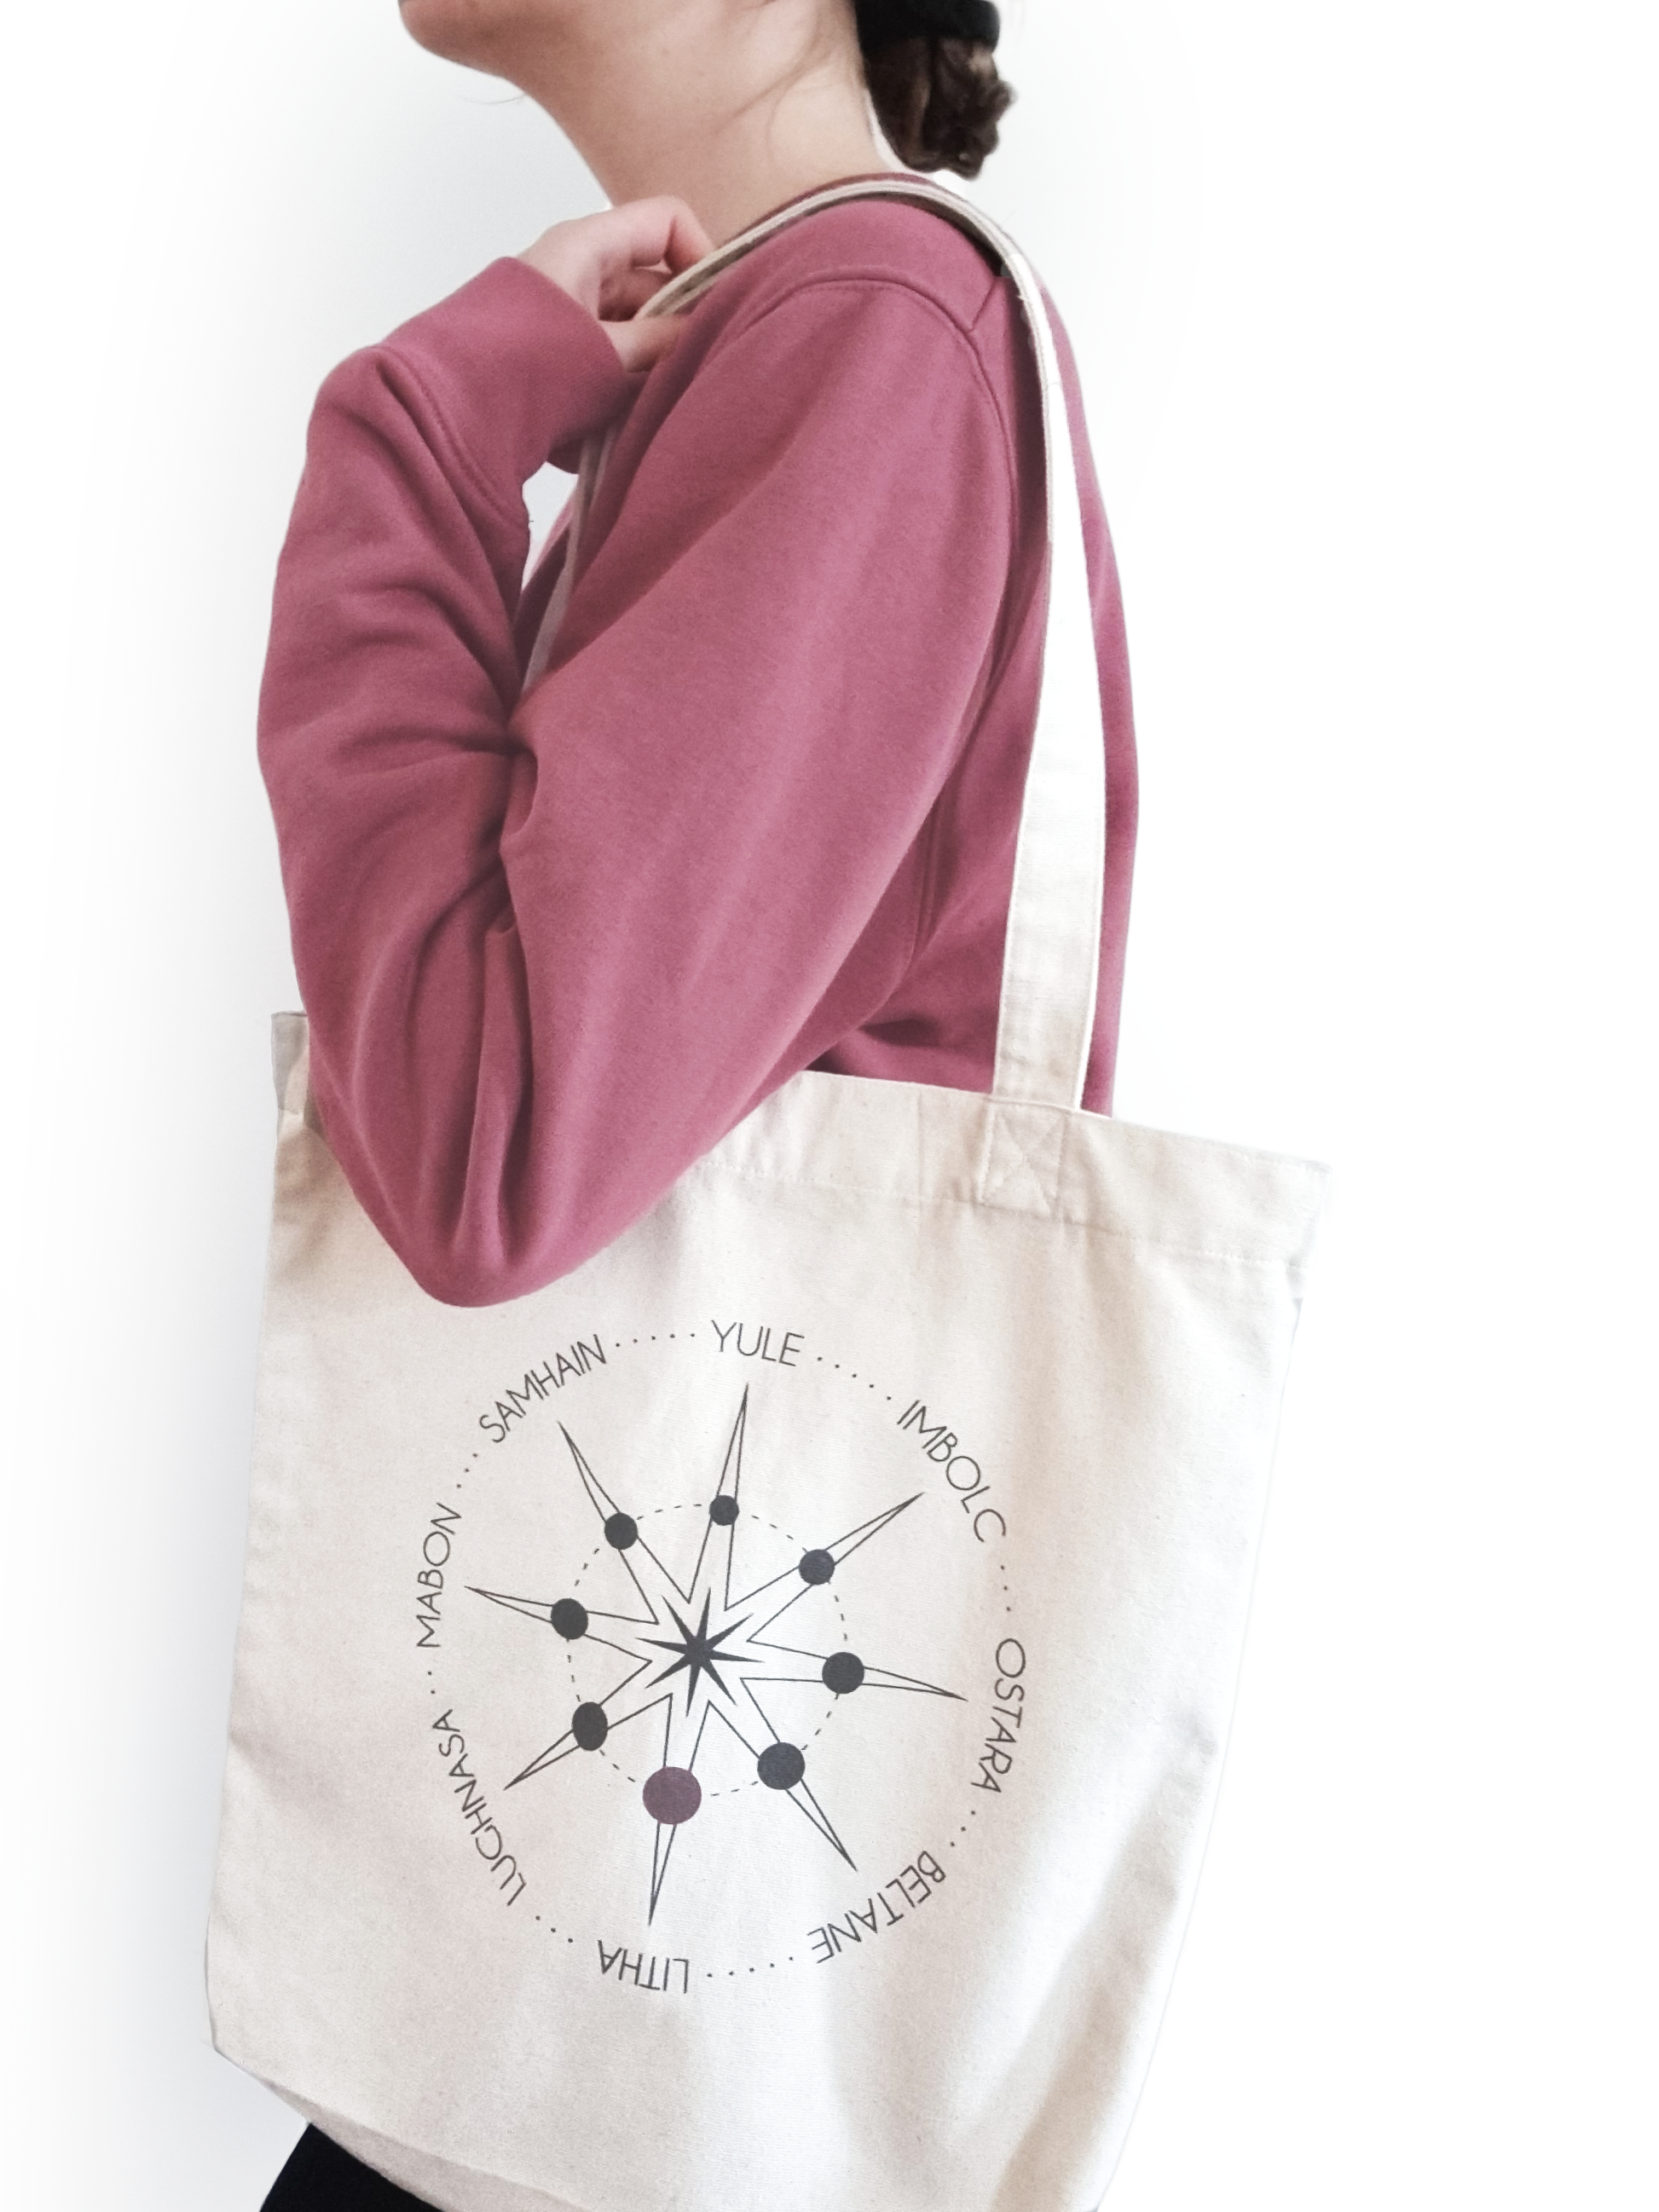 Ethical and sustainable, natural raw, organic and recycled tote bag / shopping bag / shopper with a printed witchy / pagan / wiccan / spiritual wheel of the year design for yoga, gym, or lounge wear.